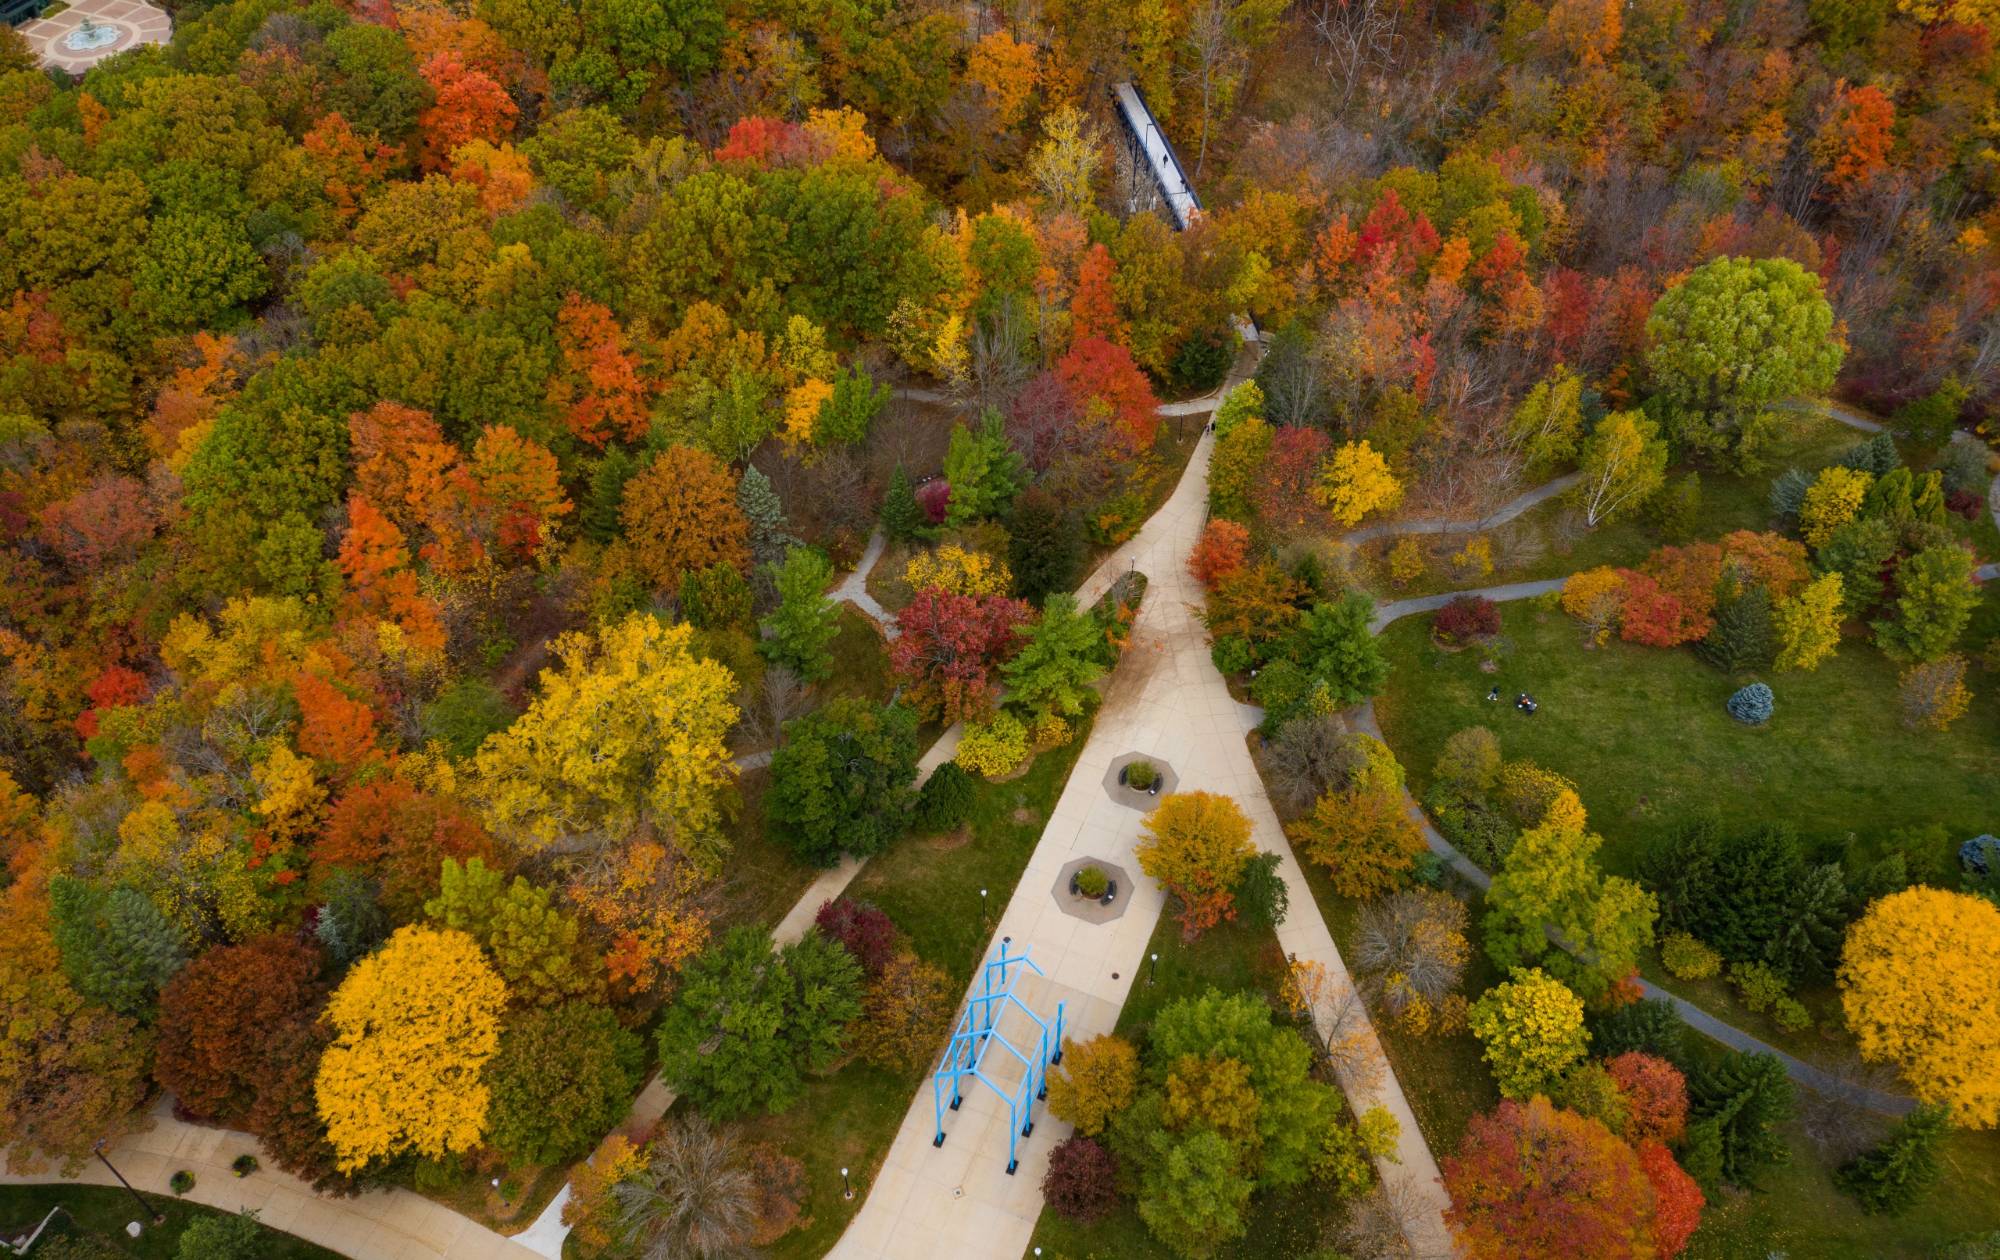 Drone image of Allendale's campus during the Fall near the Transformational Link - a bright blue sculpture